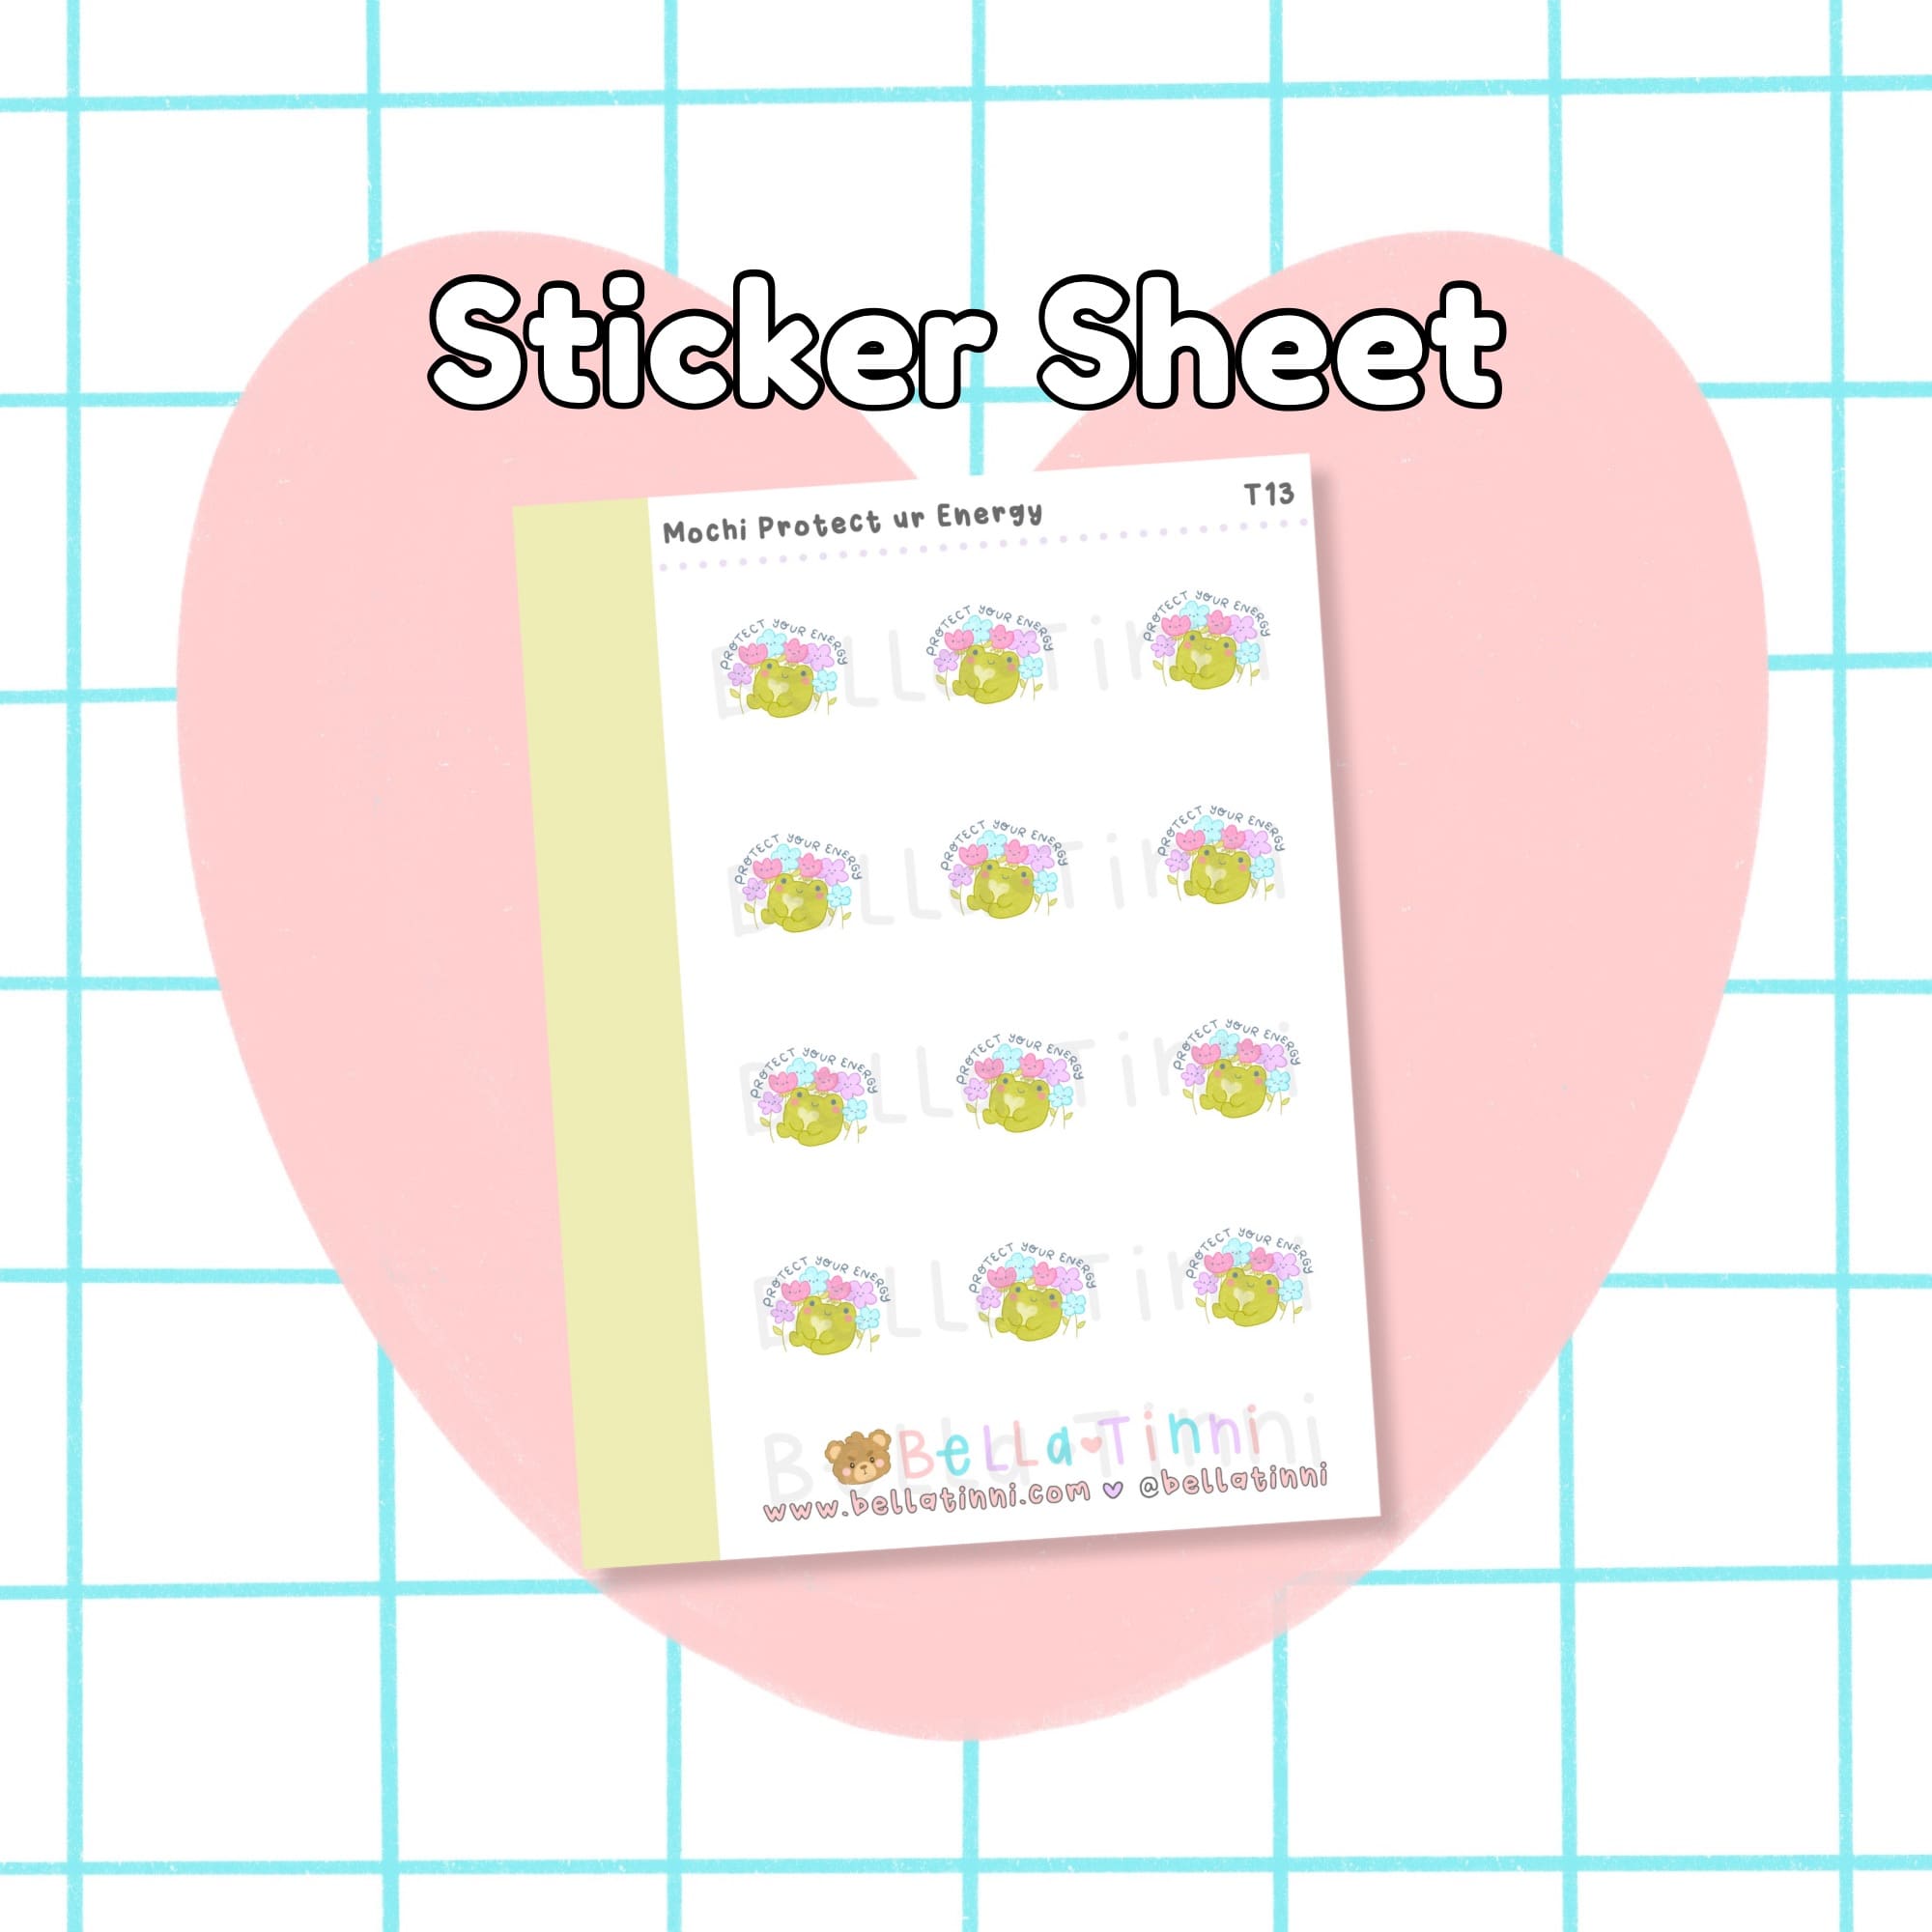 Mochi Protect your Energy (Mini Stickers) - T13